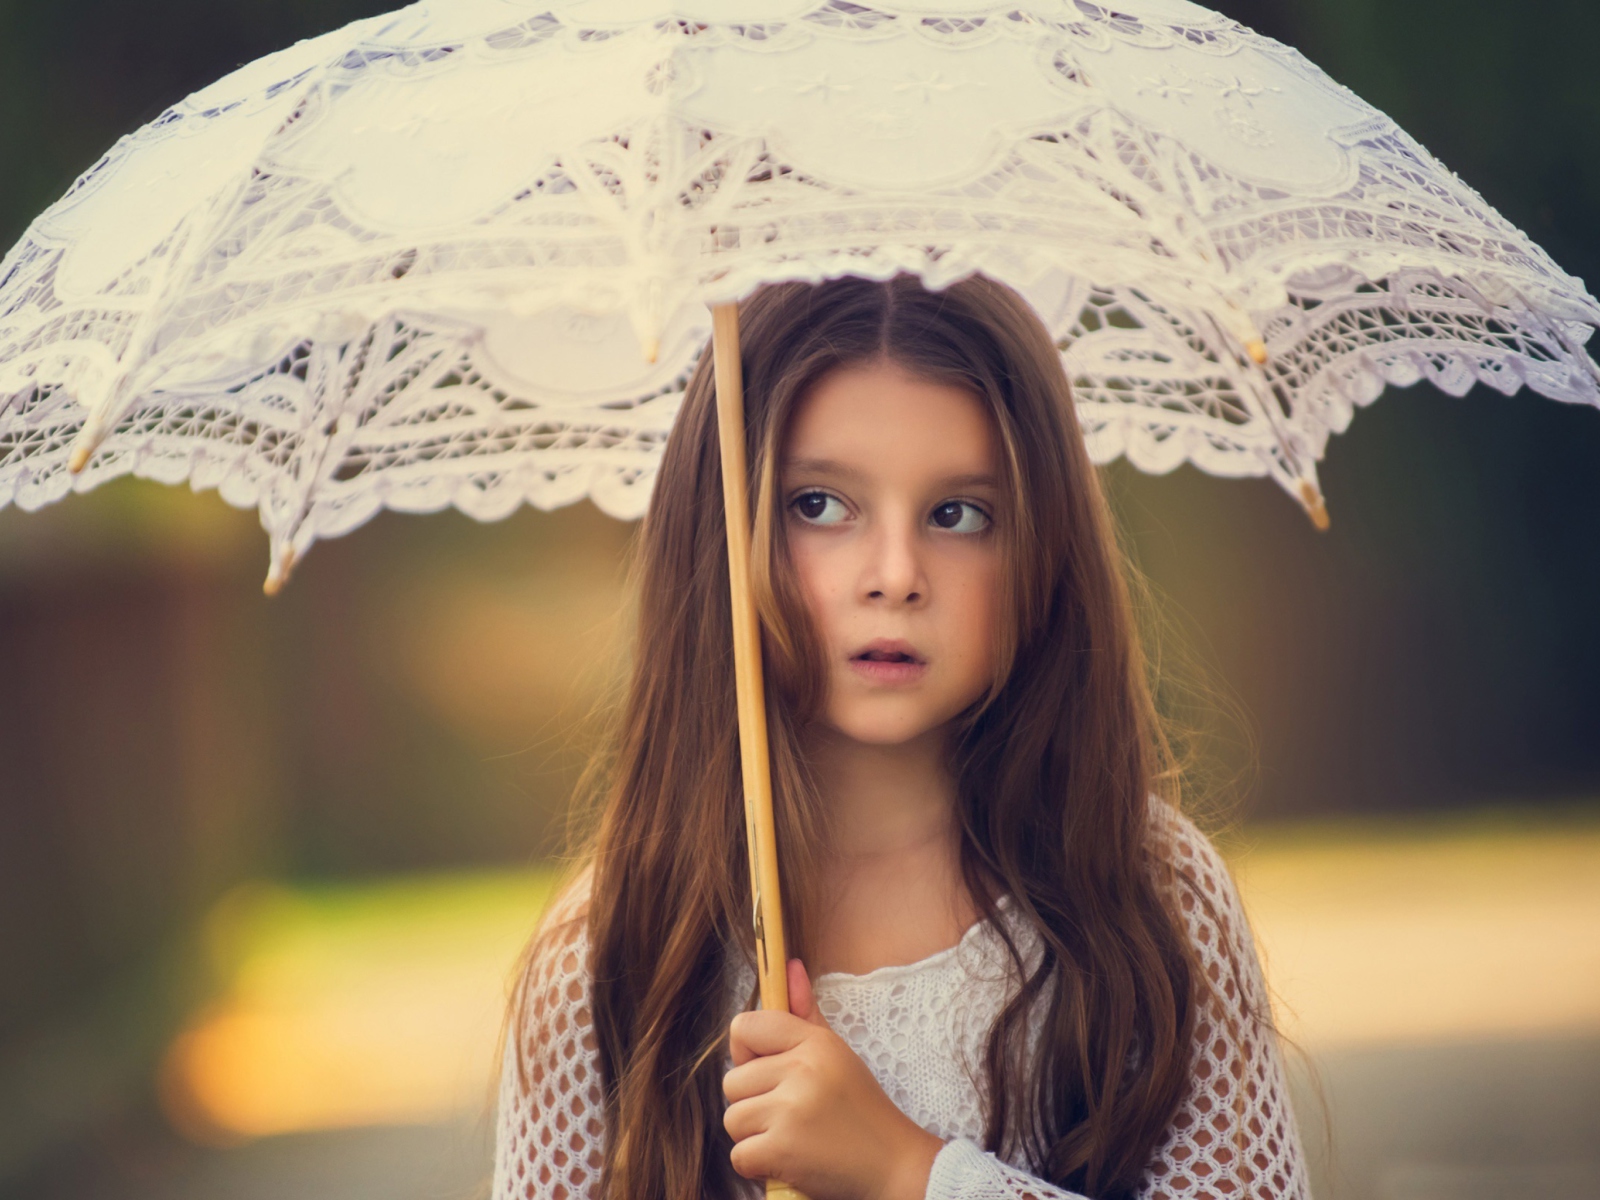 Girl With Lace Umbrella wallpaper 1600x1200